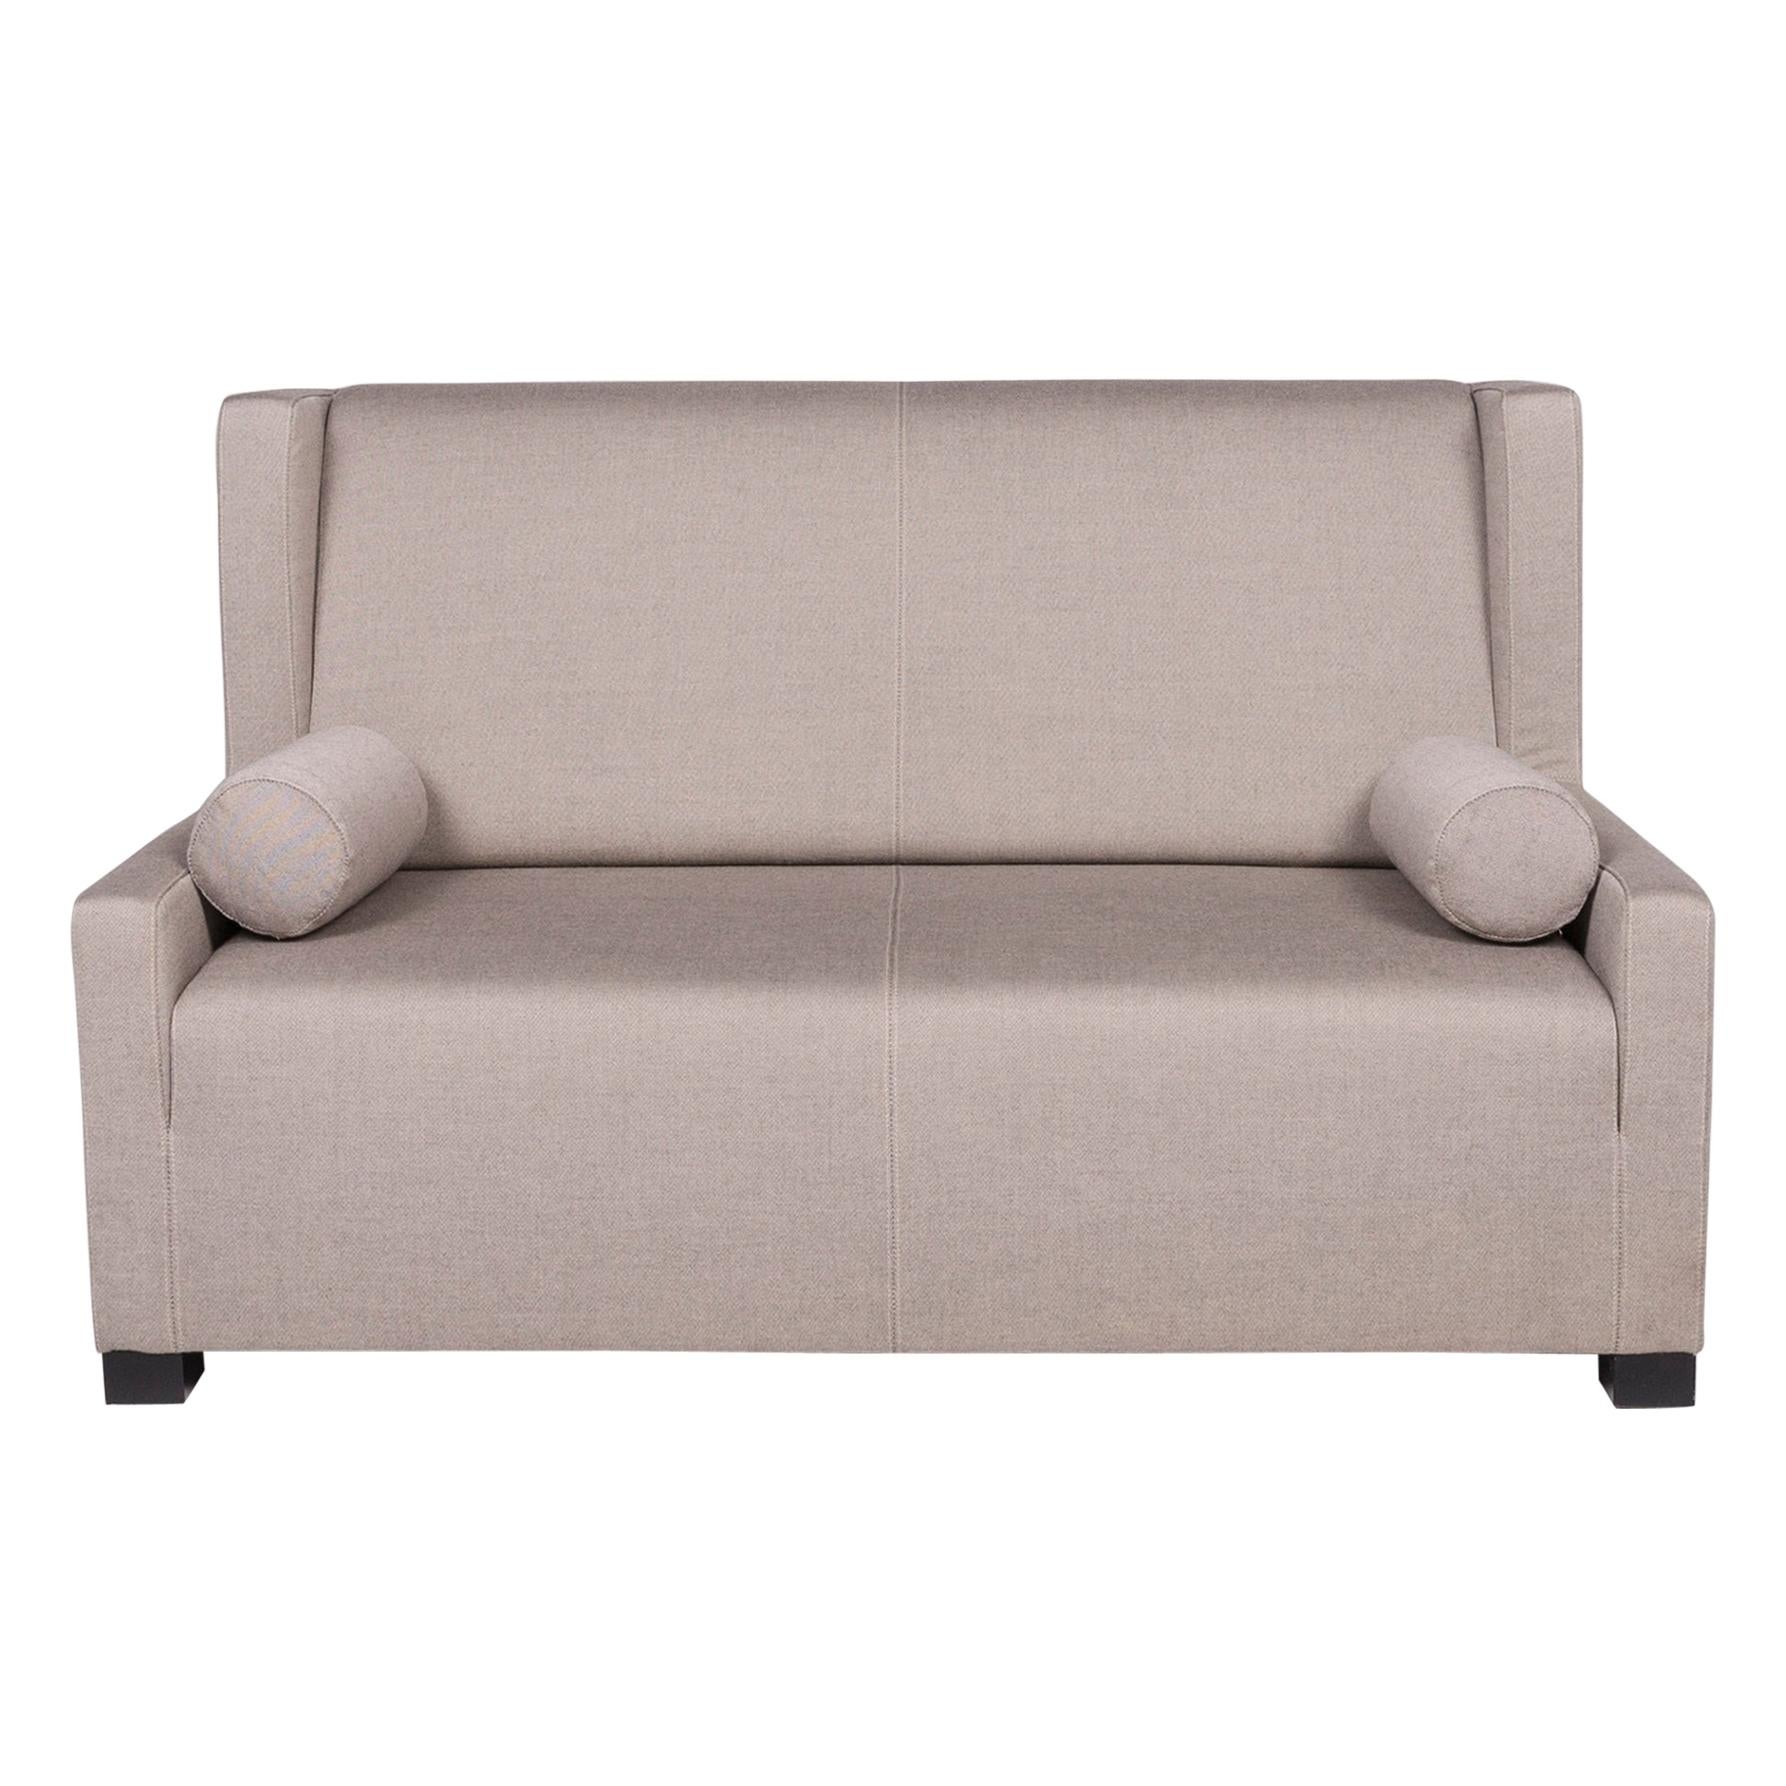 Wittmann Museo Fabric Sofa Gray Two-Seat Couch For Sale